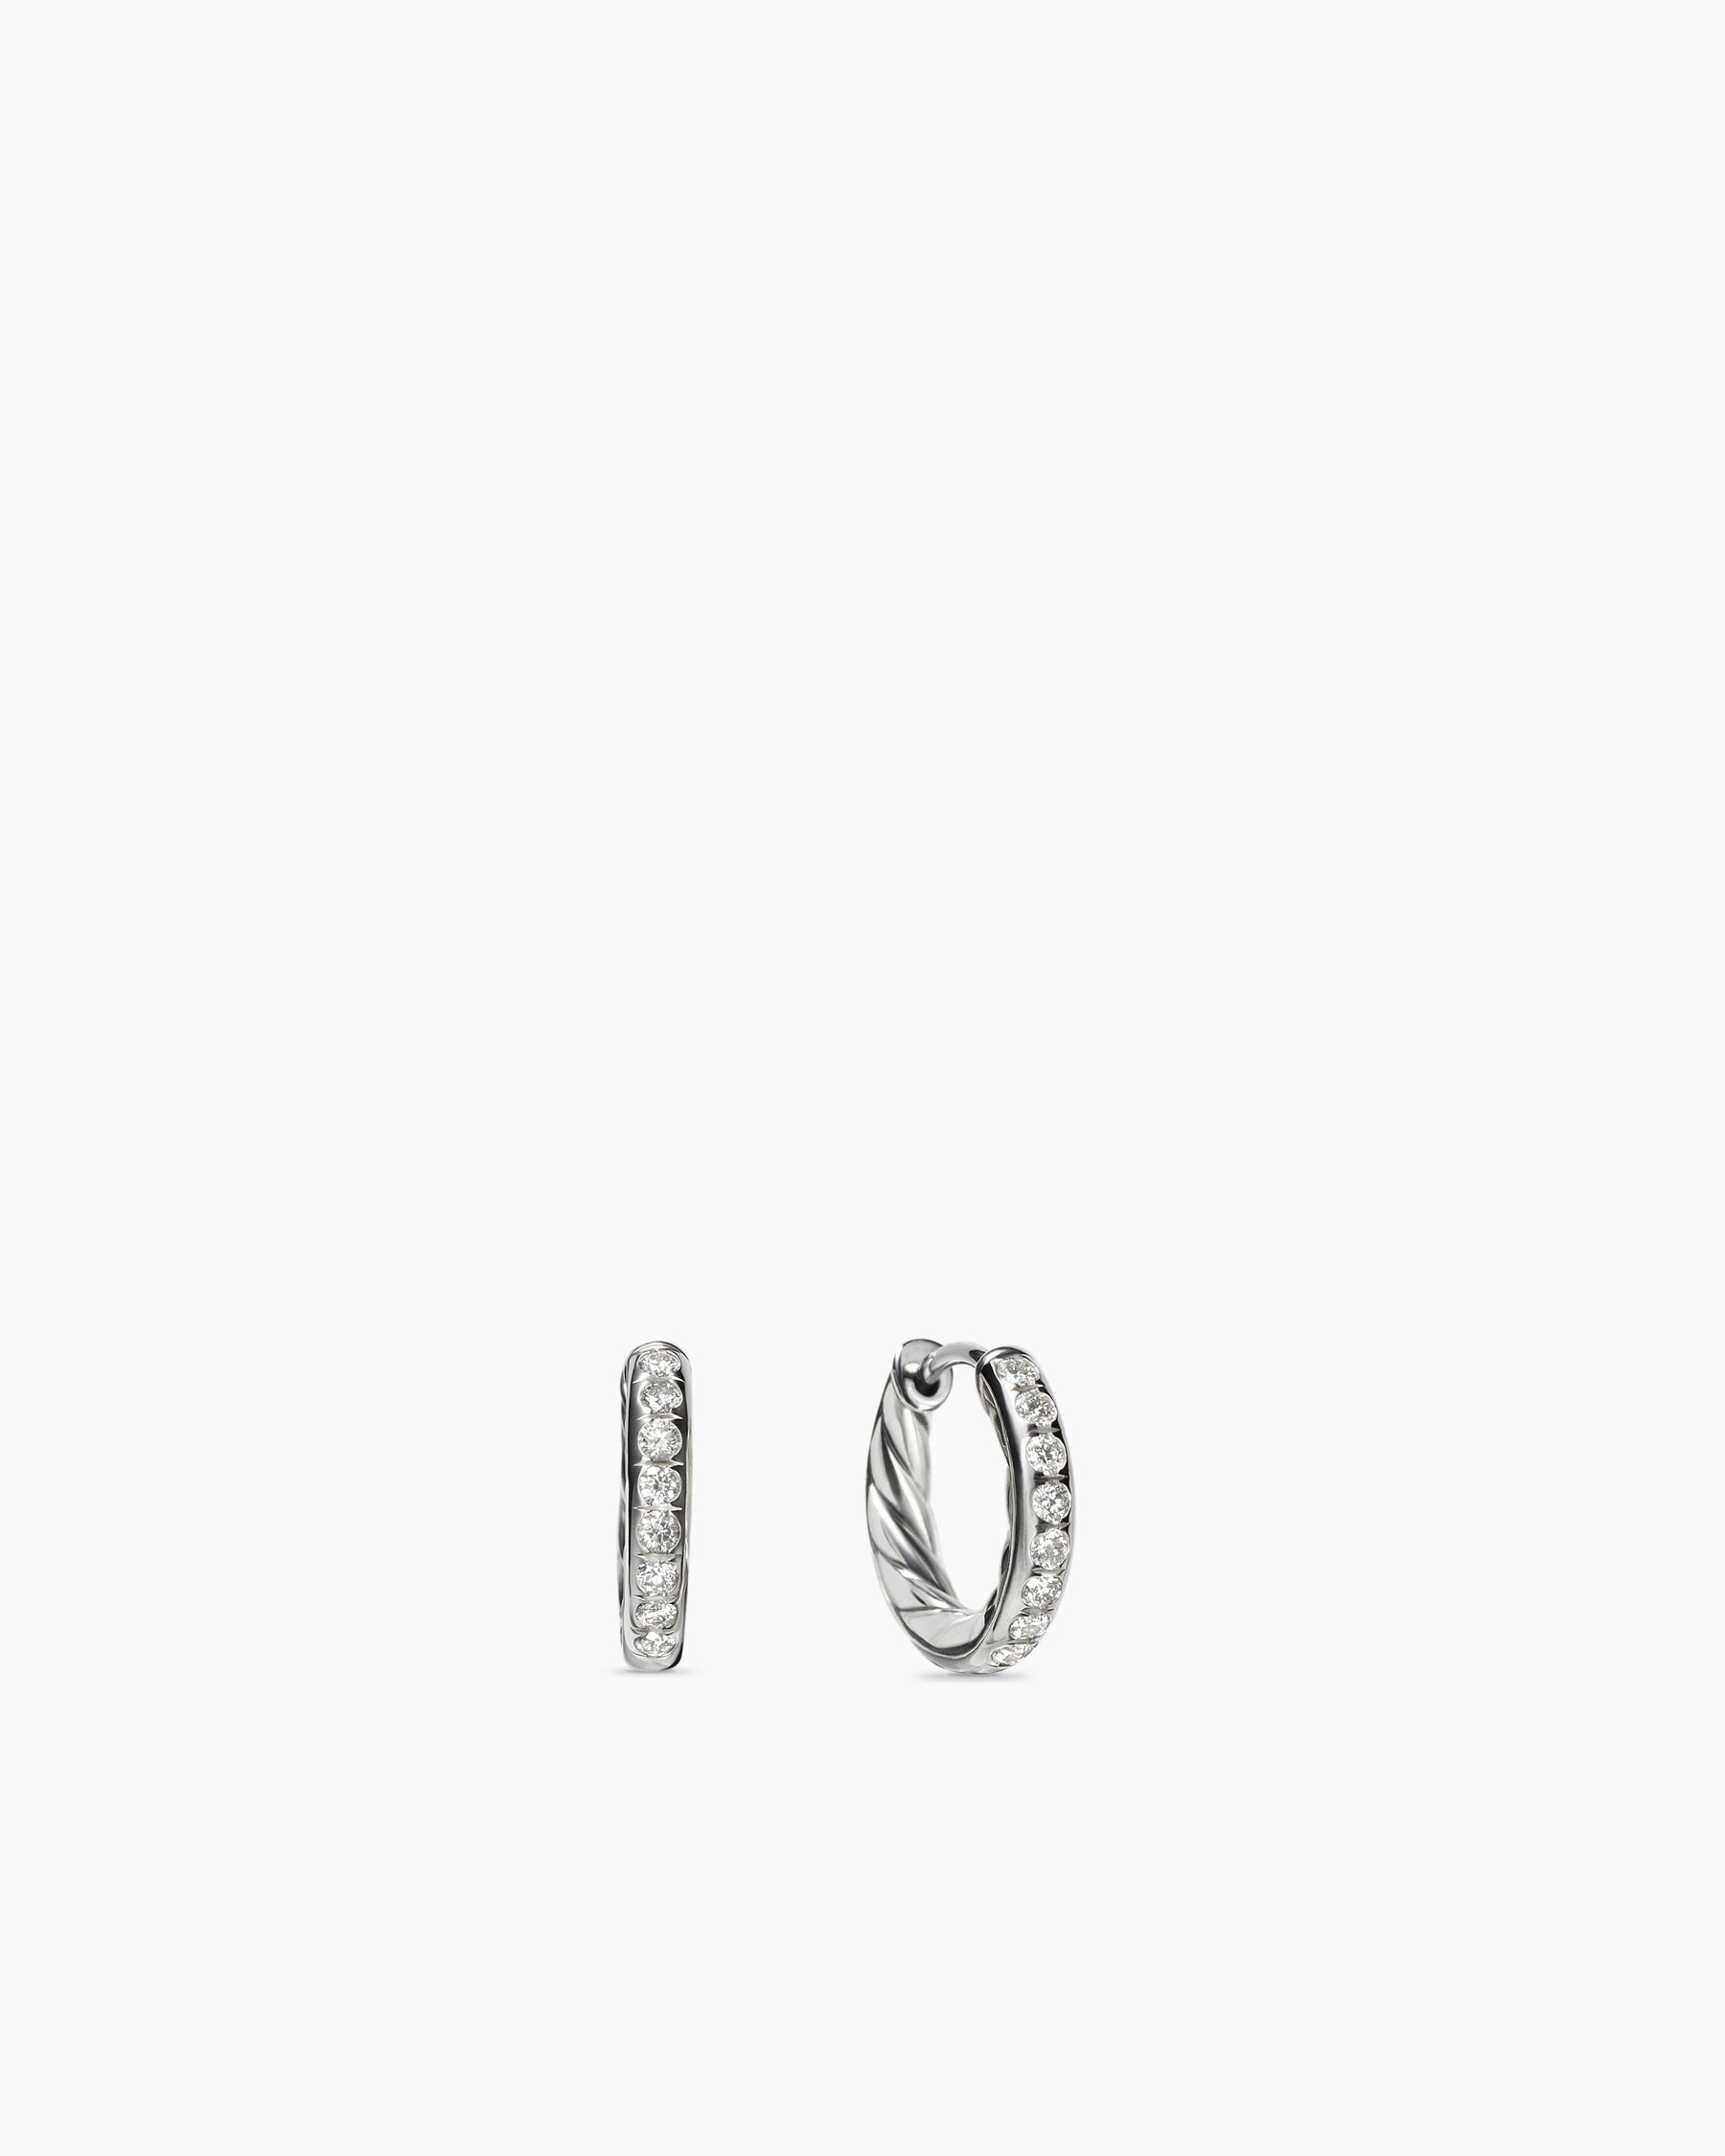 Sculpted Cable Huggie Hoop Earrings in Sterling Silver With Diamonds, 13mm